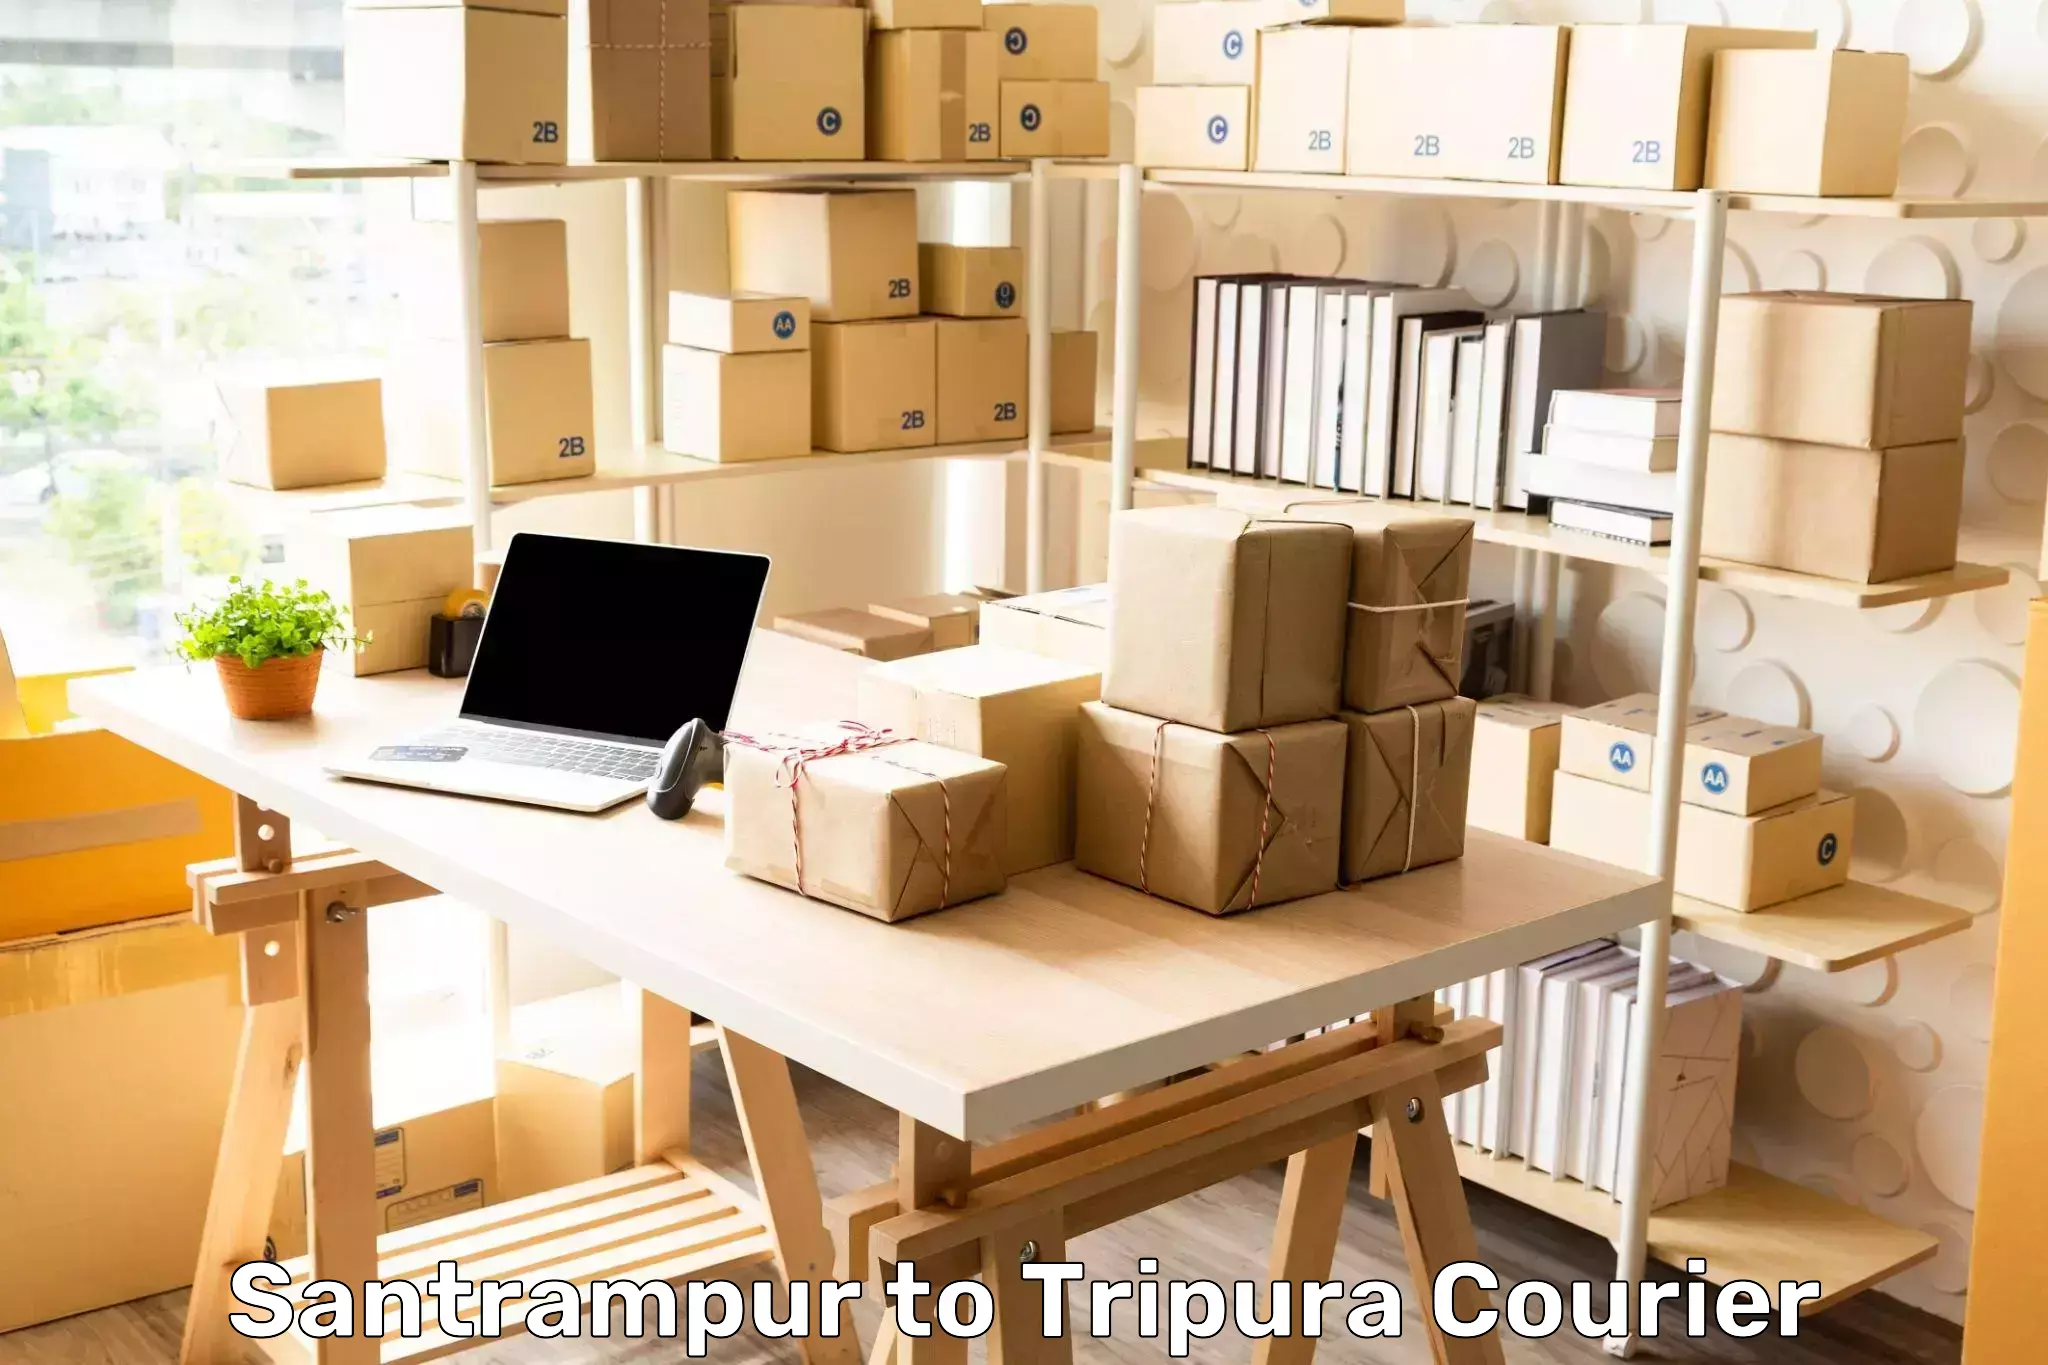 Courier service booking Santrampur to Dhalai